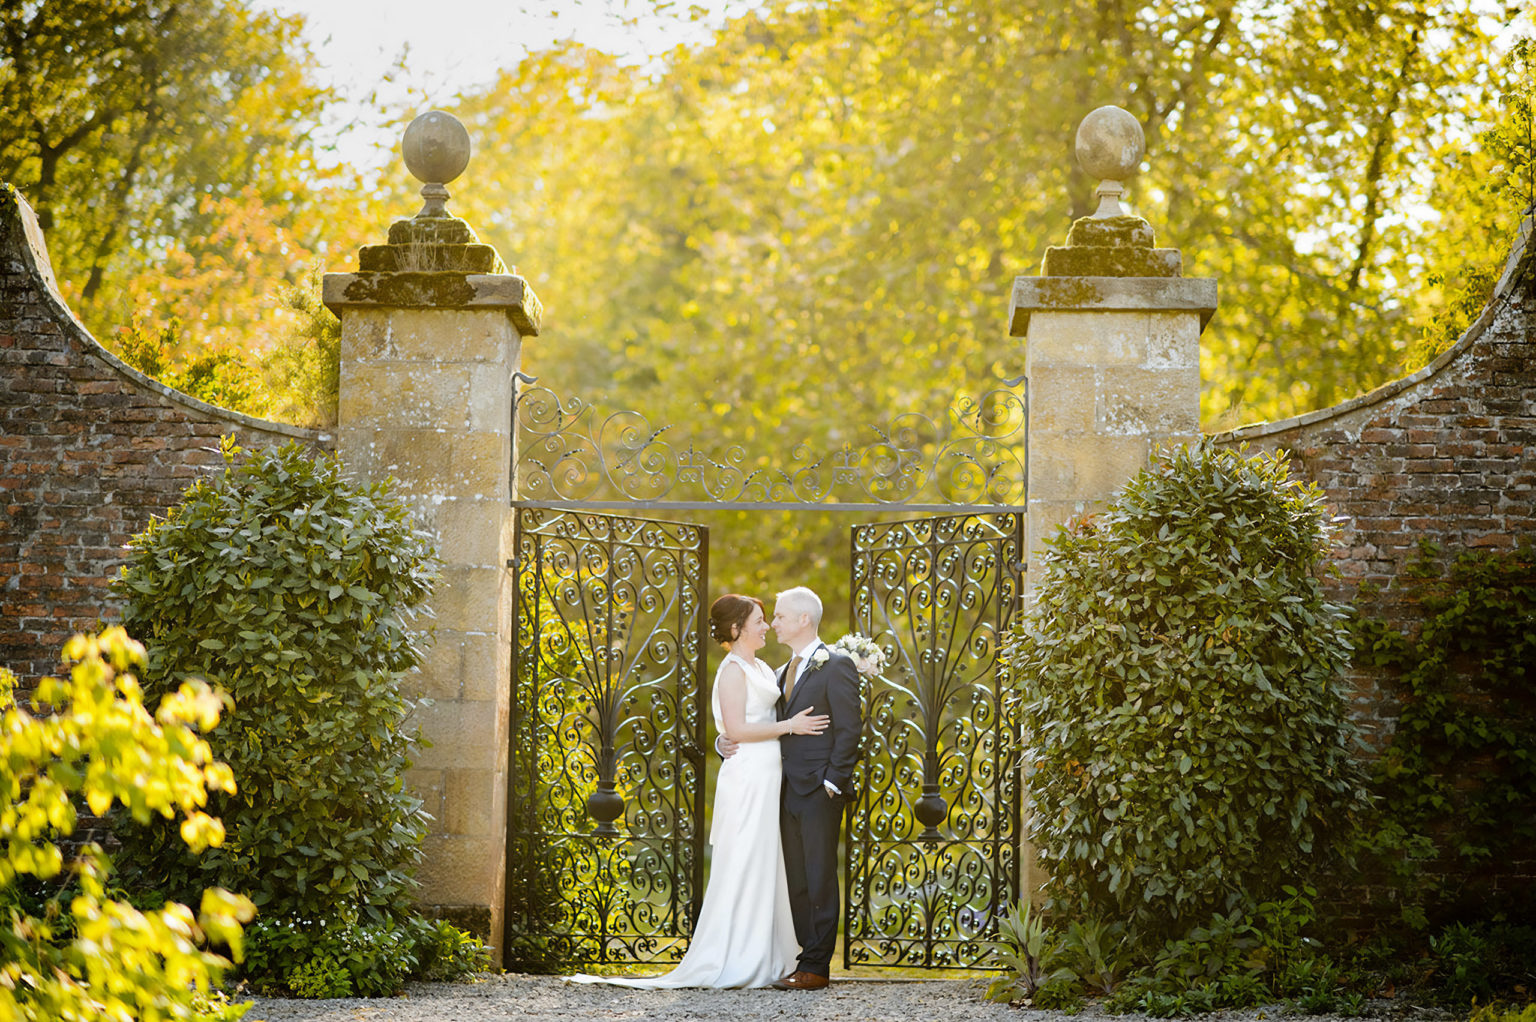 Happy newlyweds standing in front of the gate in the walled garden at Swinton Park in North Yorkshire. Photo by Ryan Browne.